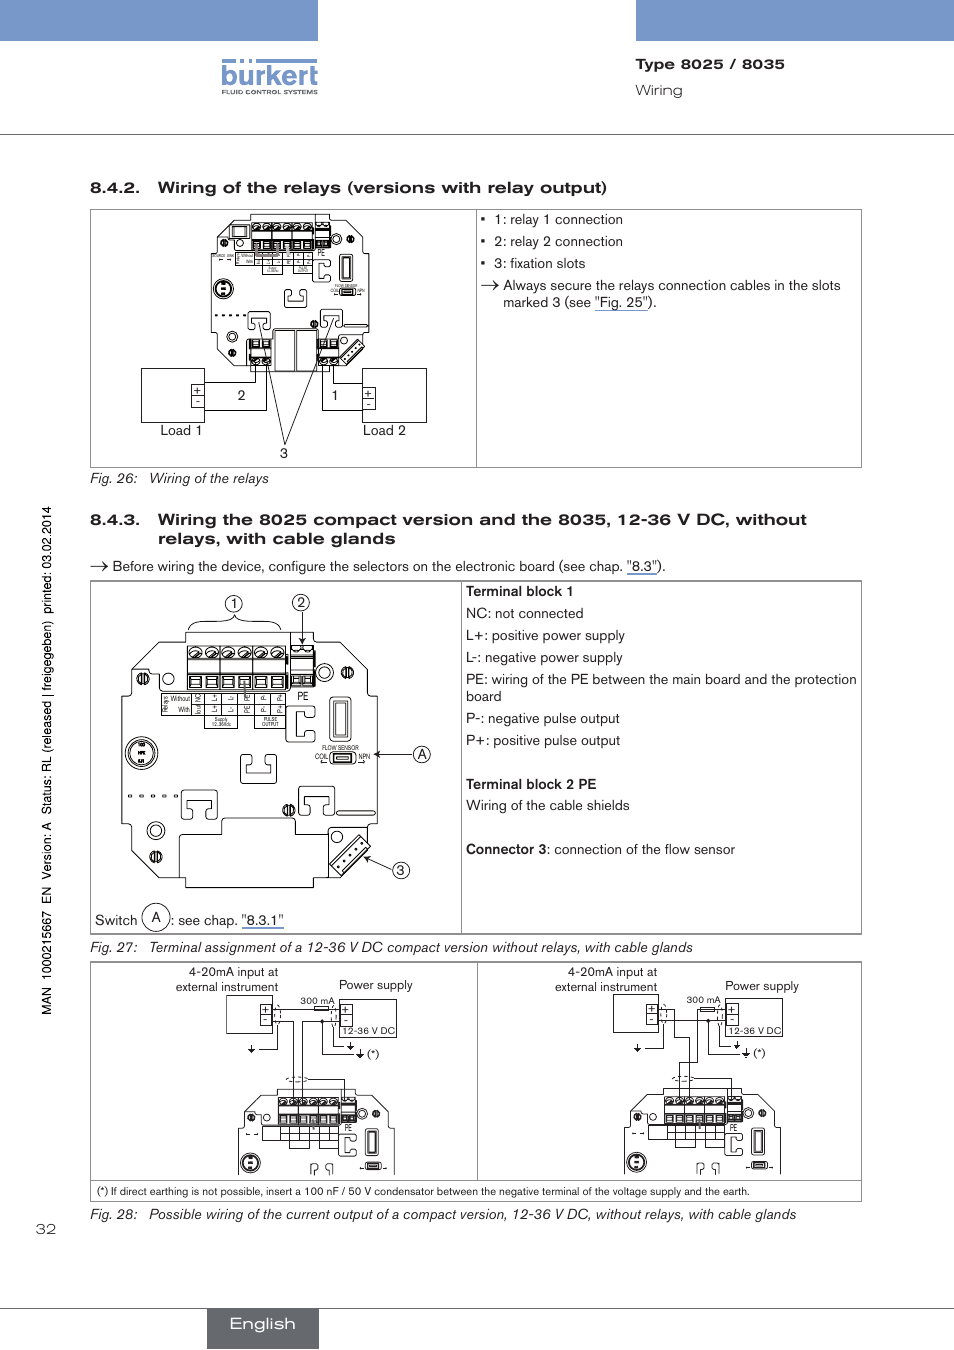 Wiring of the relays (versions with relay output), English, Power supply  4-20ma input at external instrument | Burkert Type 8025 User Manual | Page  32 / 66 | Original mode